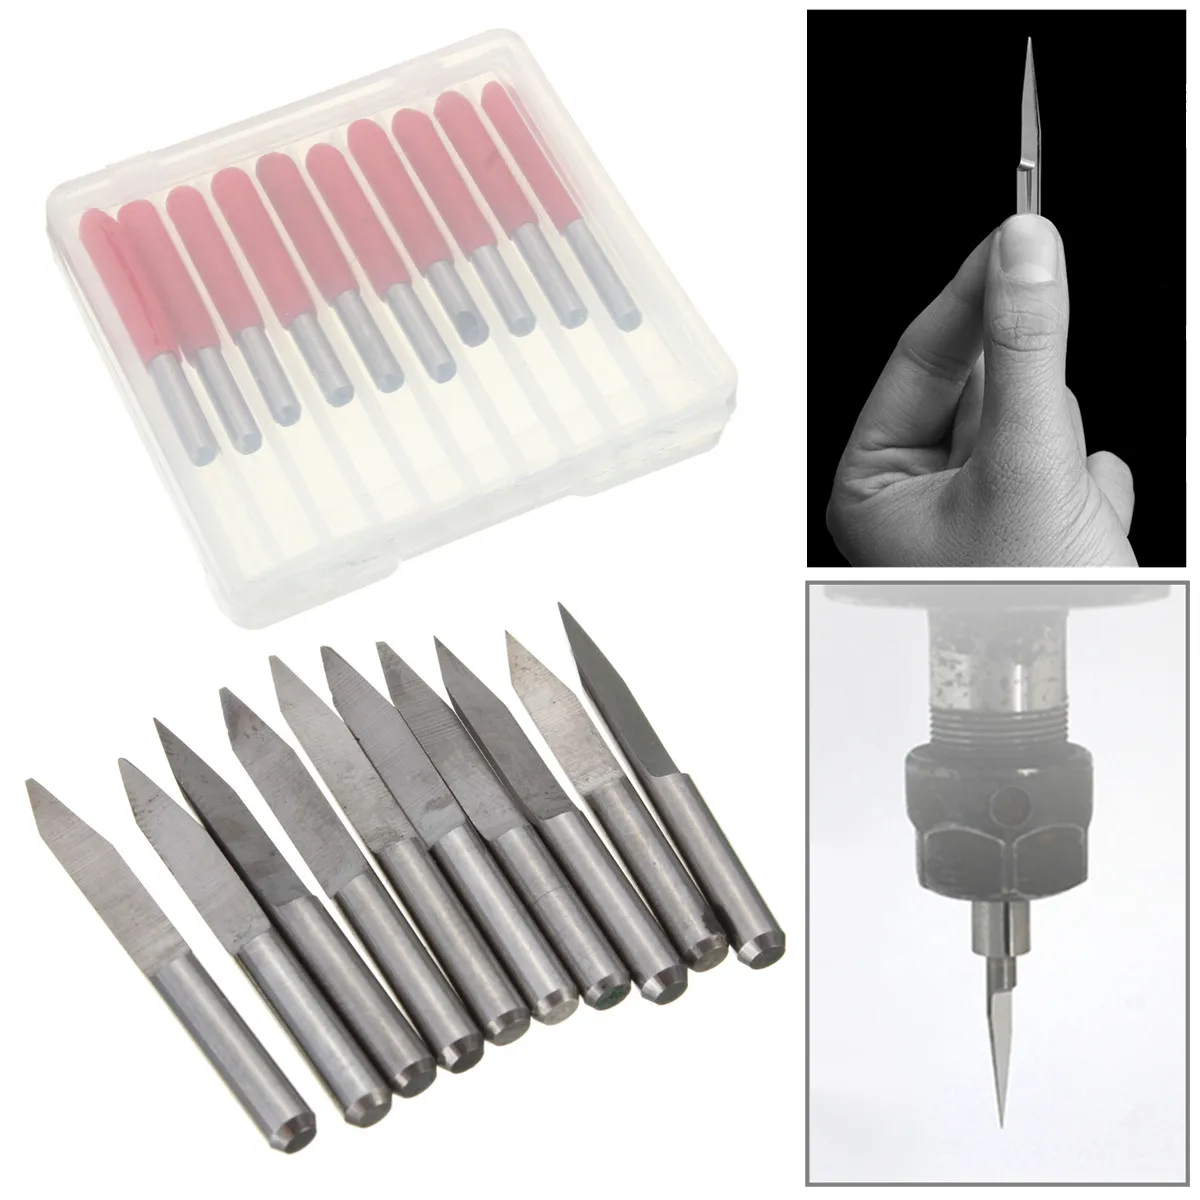 10Pcs 3.175mm Shank 30 Degree 0.1mm Carbide PCB Engraving Bits CNC Router Tool used for Engraving Machine Tungsten Steel